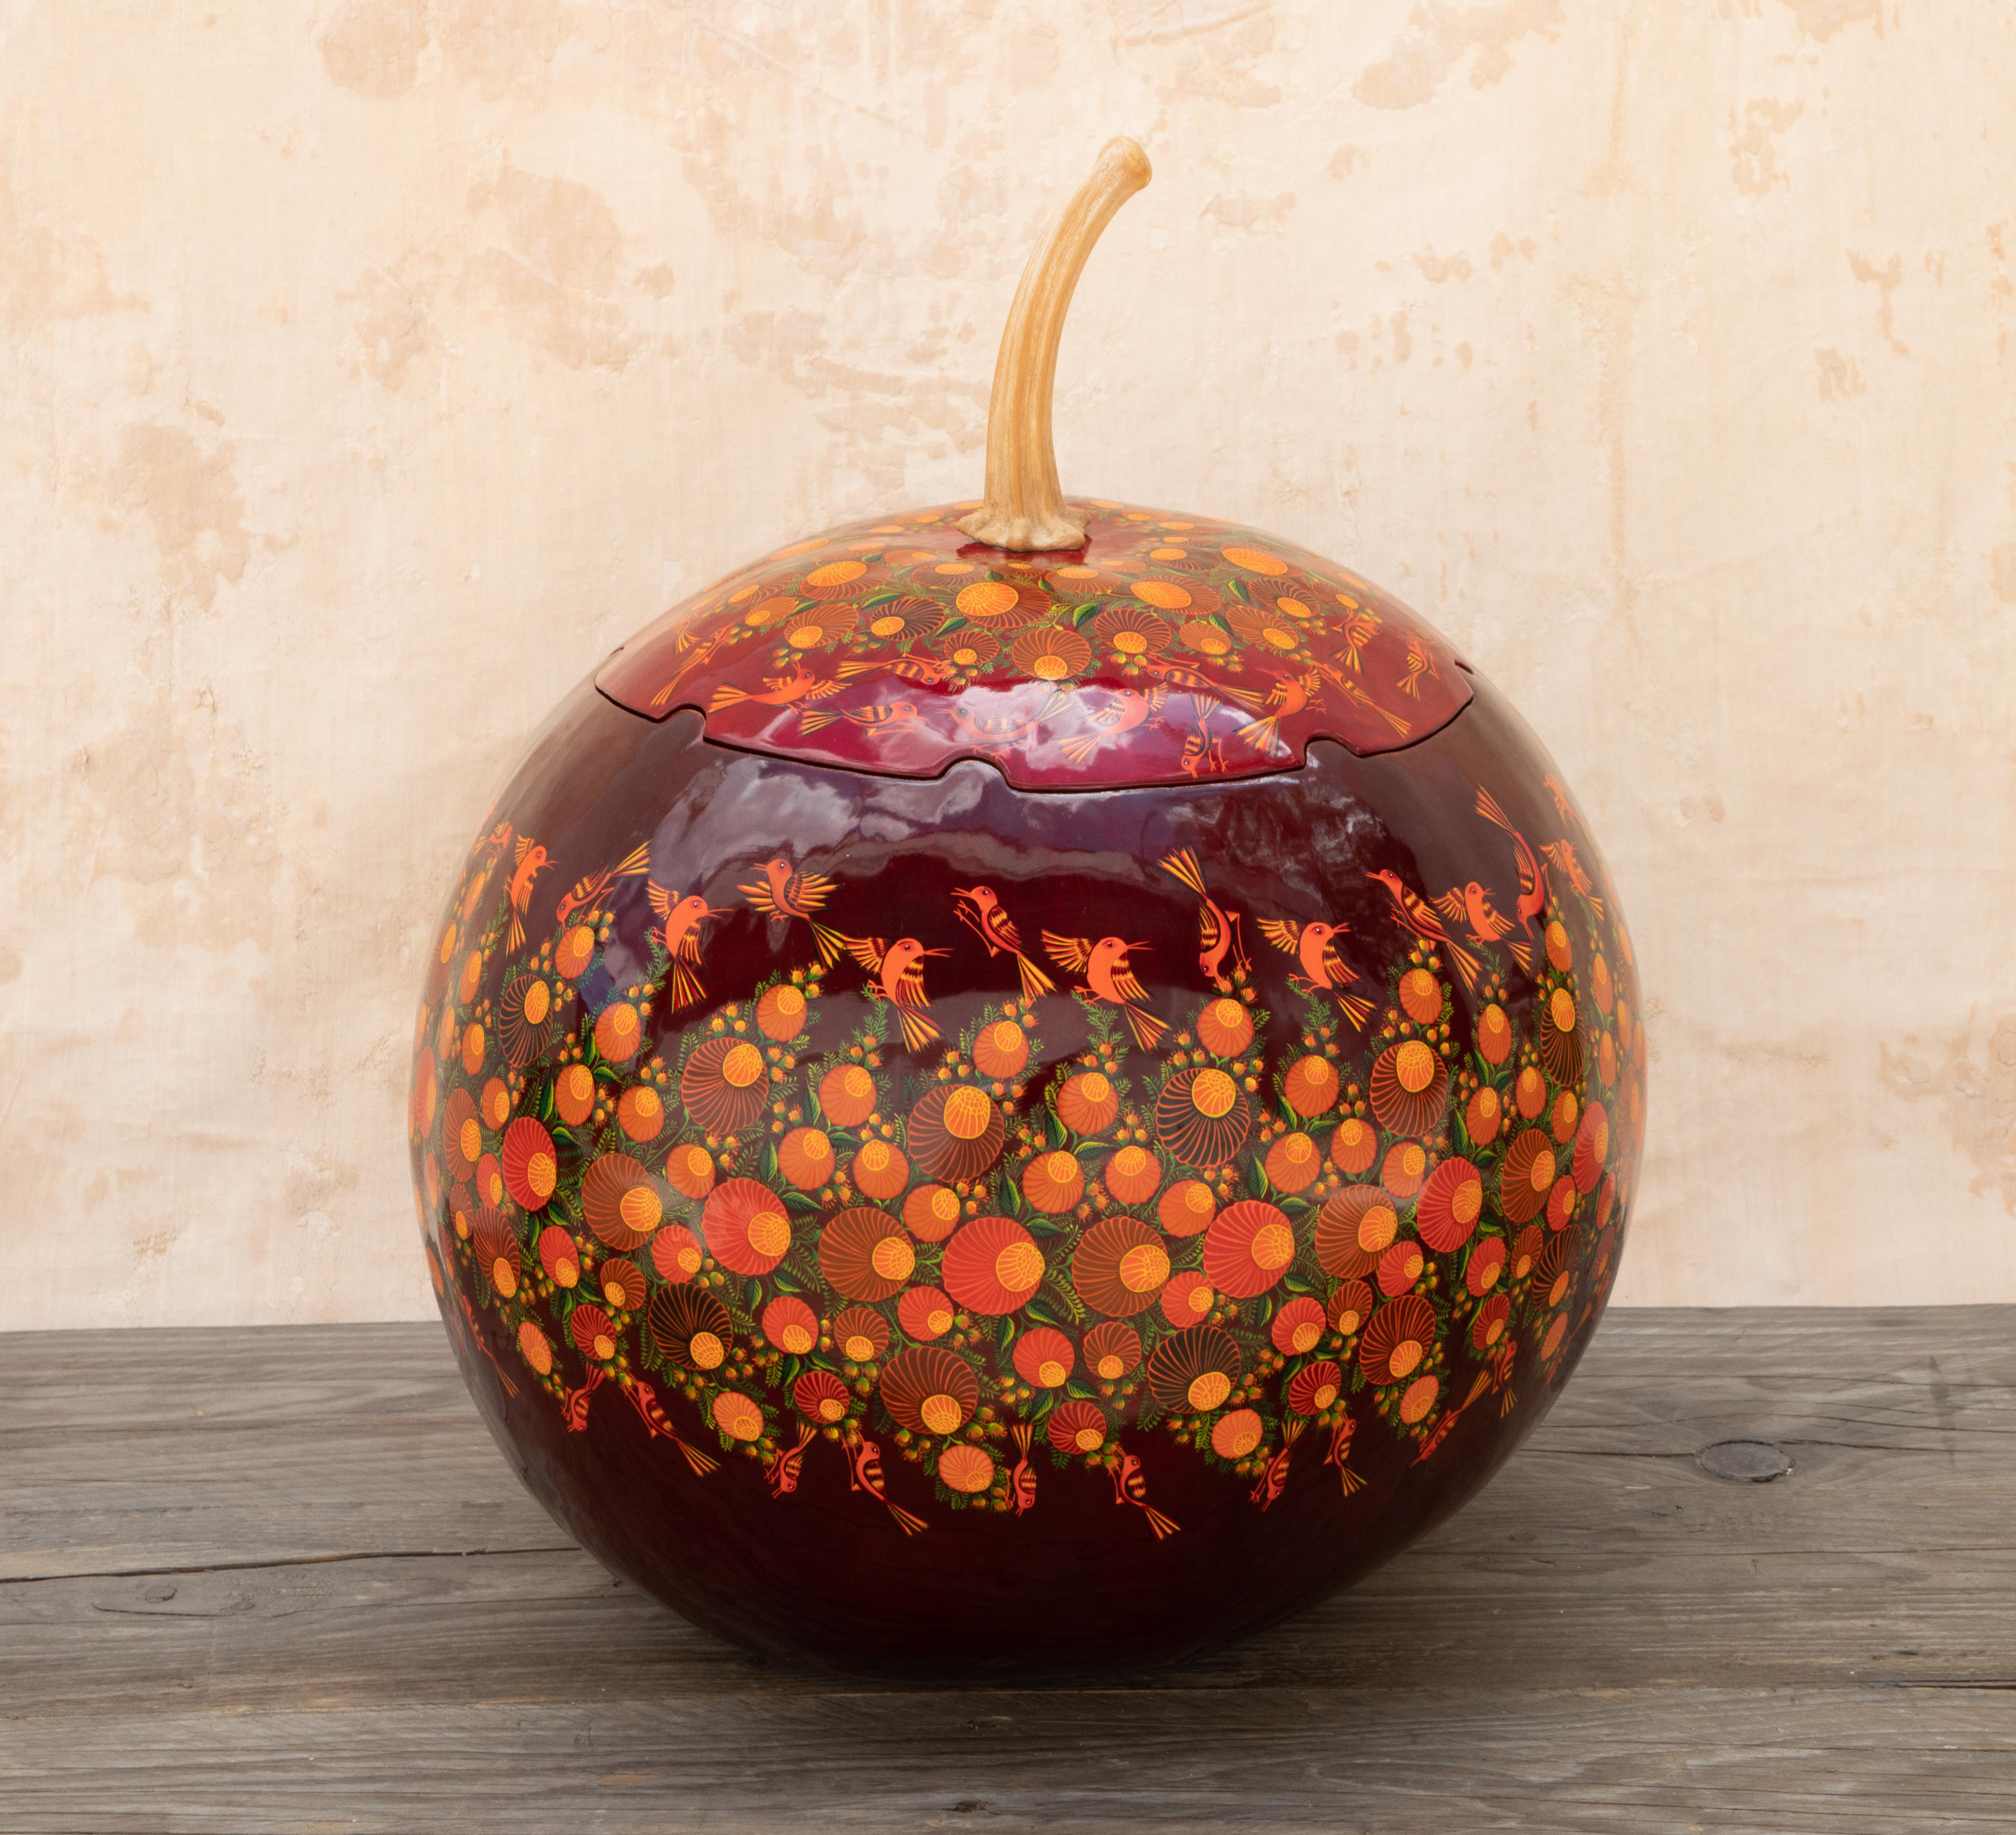 Guaje Flores Gourd by Onora
One of a Kind
Dimensions: 40 cm
Materials: Gourd, Natural pigments mixed with chia oil and then hand burnished with river stones

Monumental one of a kind gourd lacquered and hand painted by the master Florentino